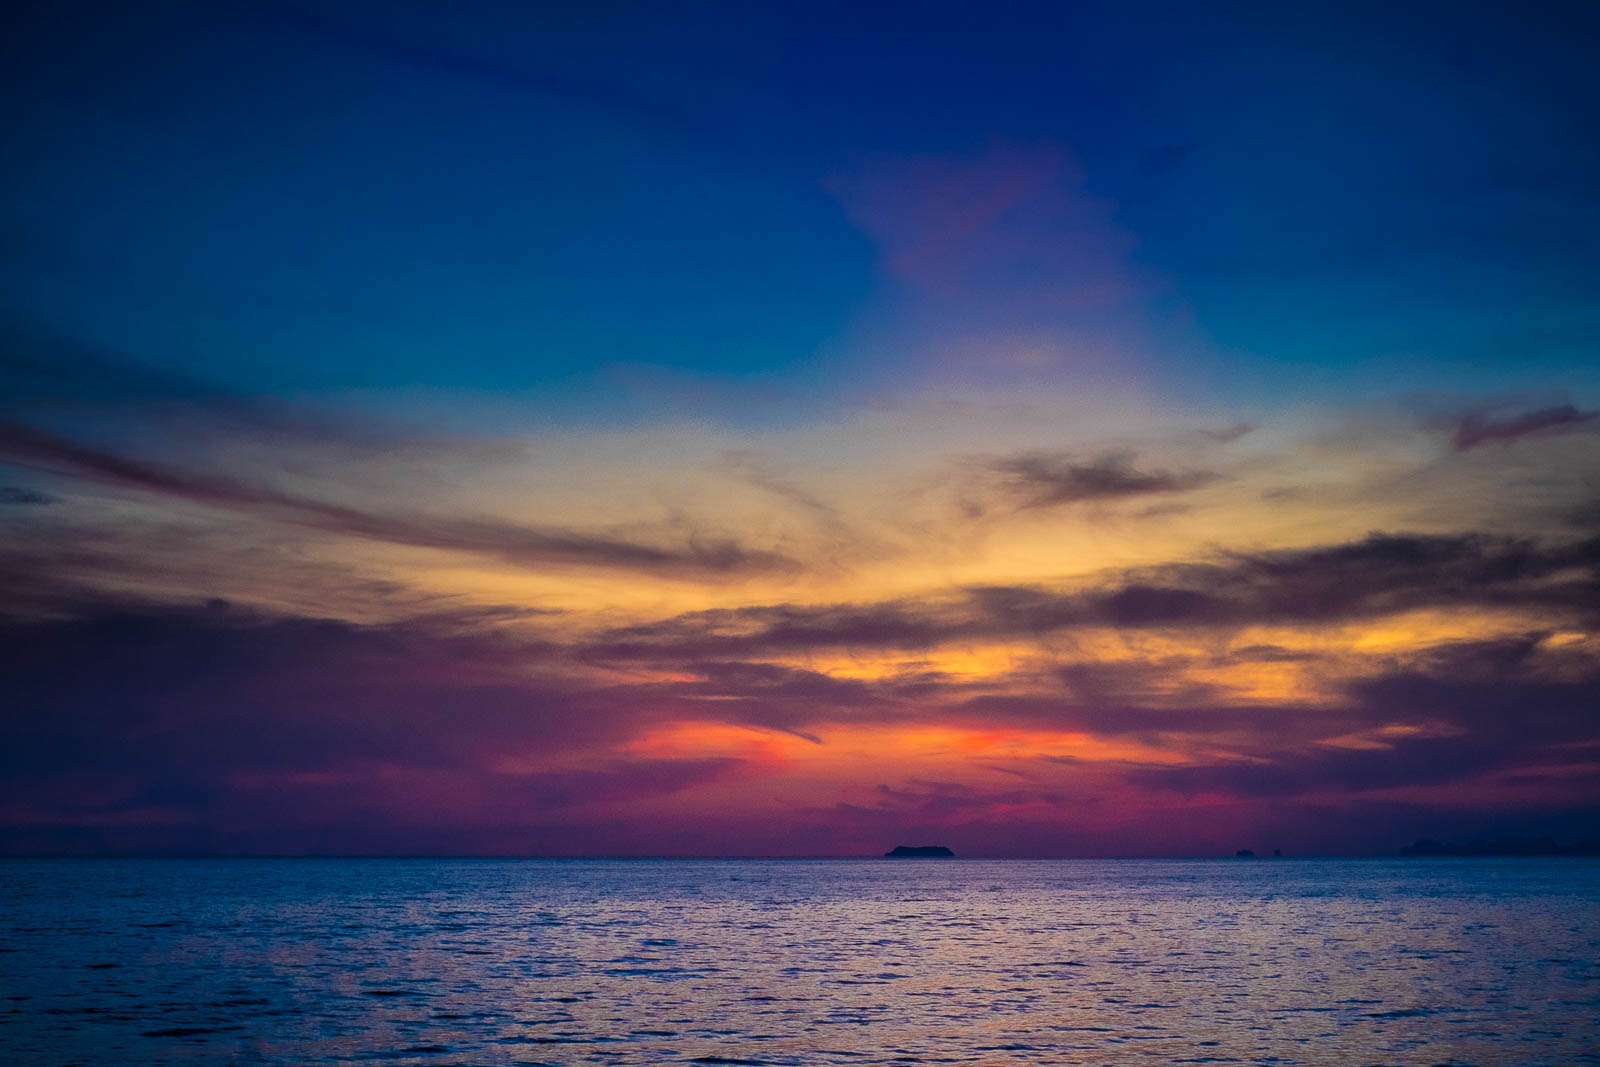 Amazing colors in the sky during sunset on Ko Lanta, Thailand